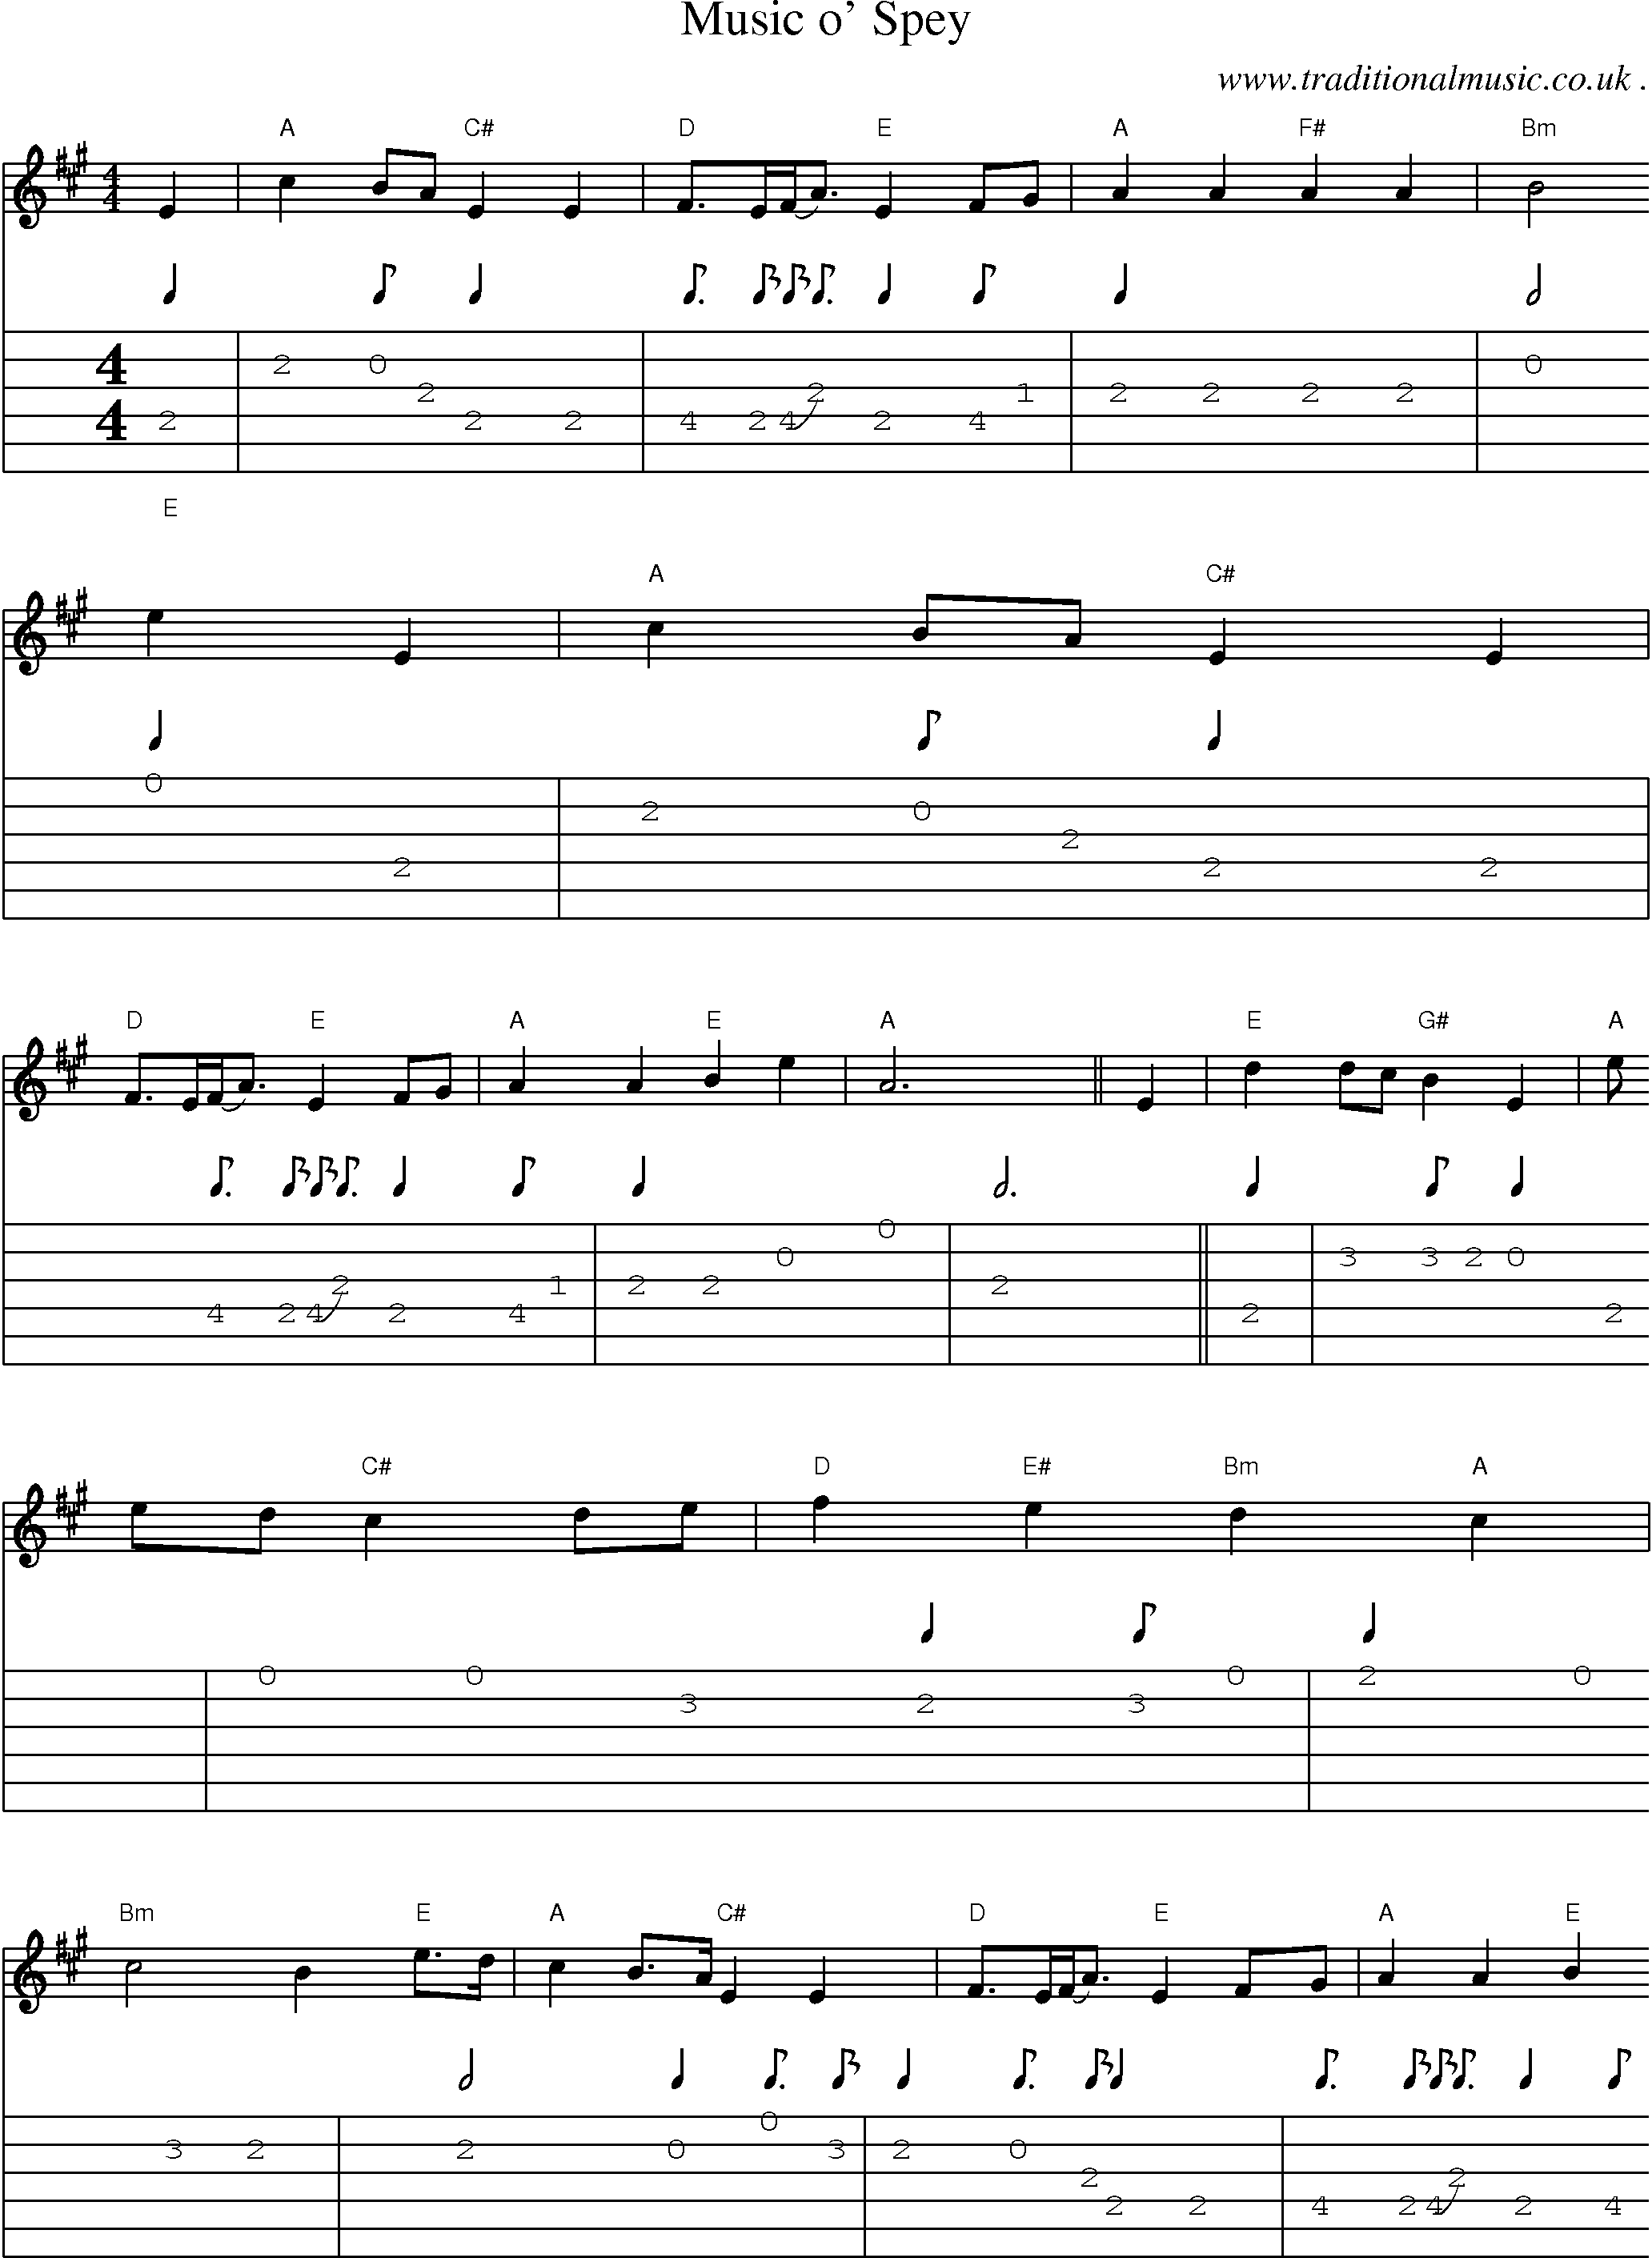 Sheet-music  score, Chords and Guitar Tabs for Music O Spey